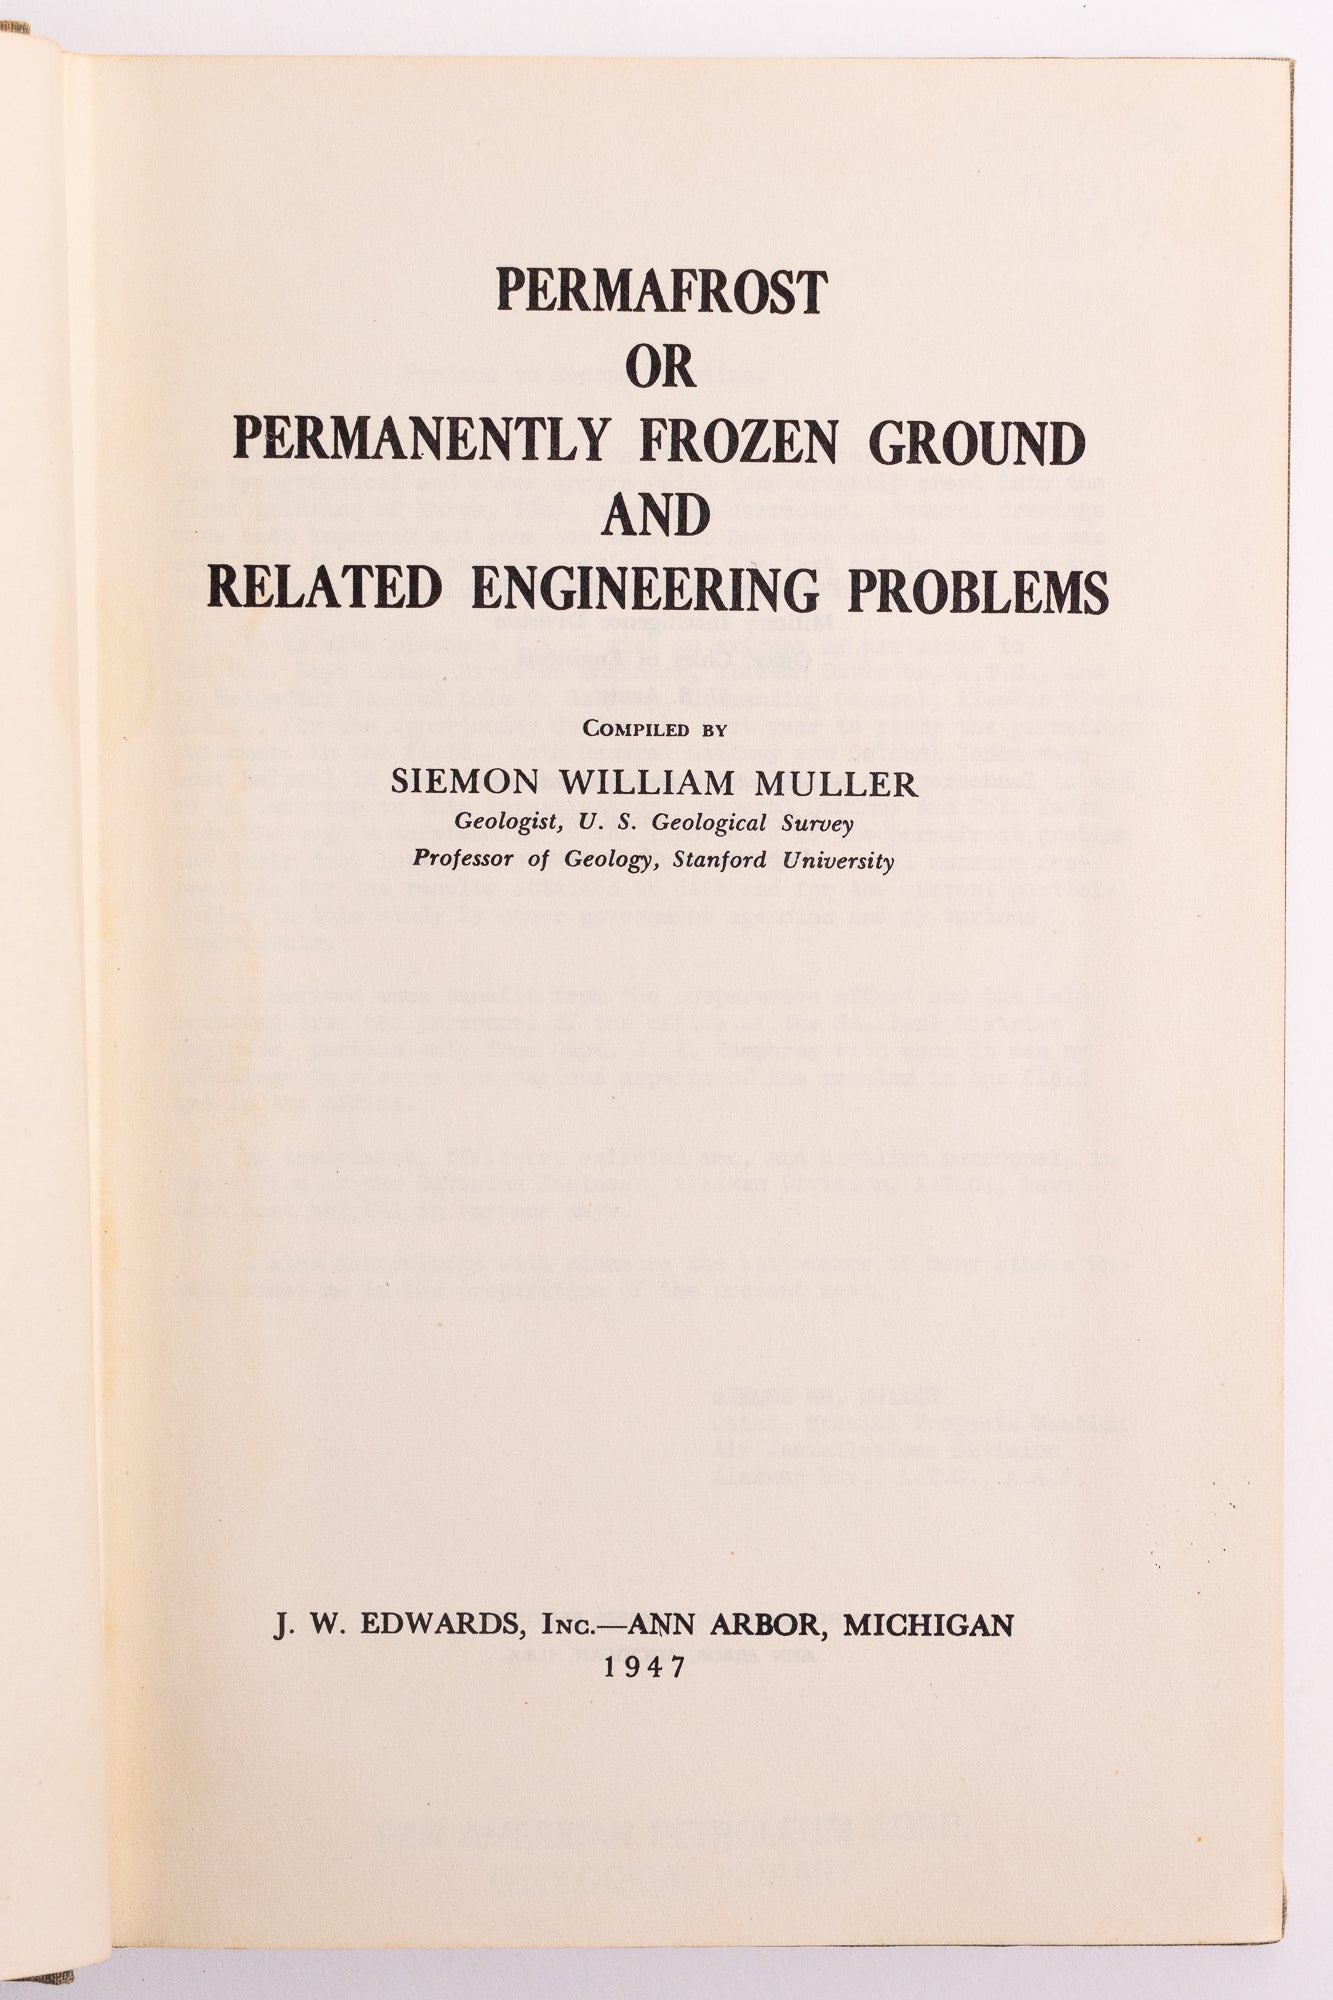 Permafrost or Permanently Frozen Ground and Related Engineering Problems